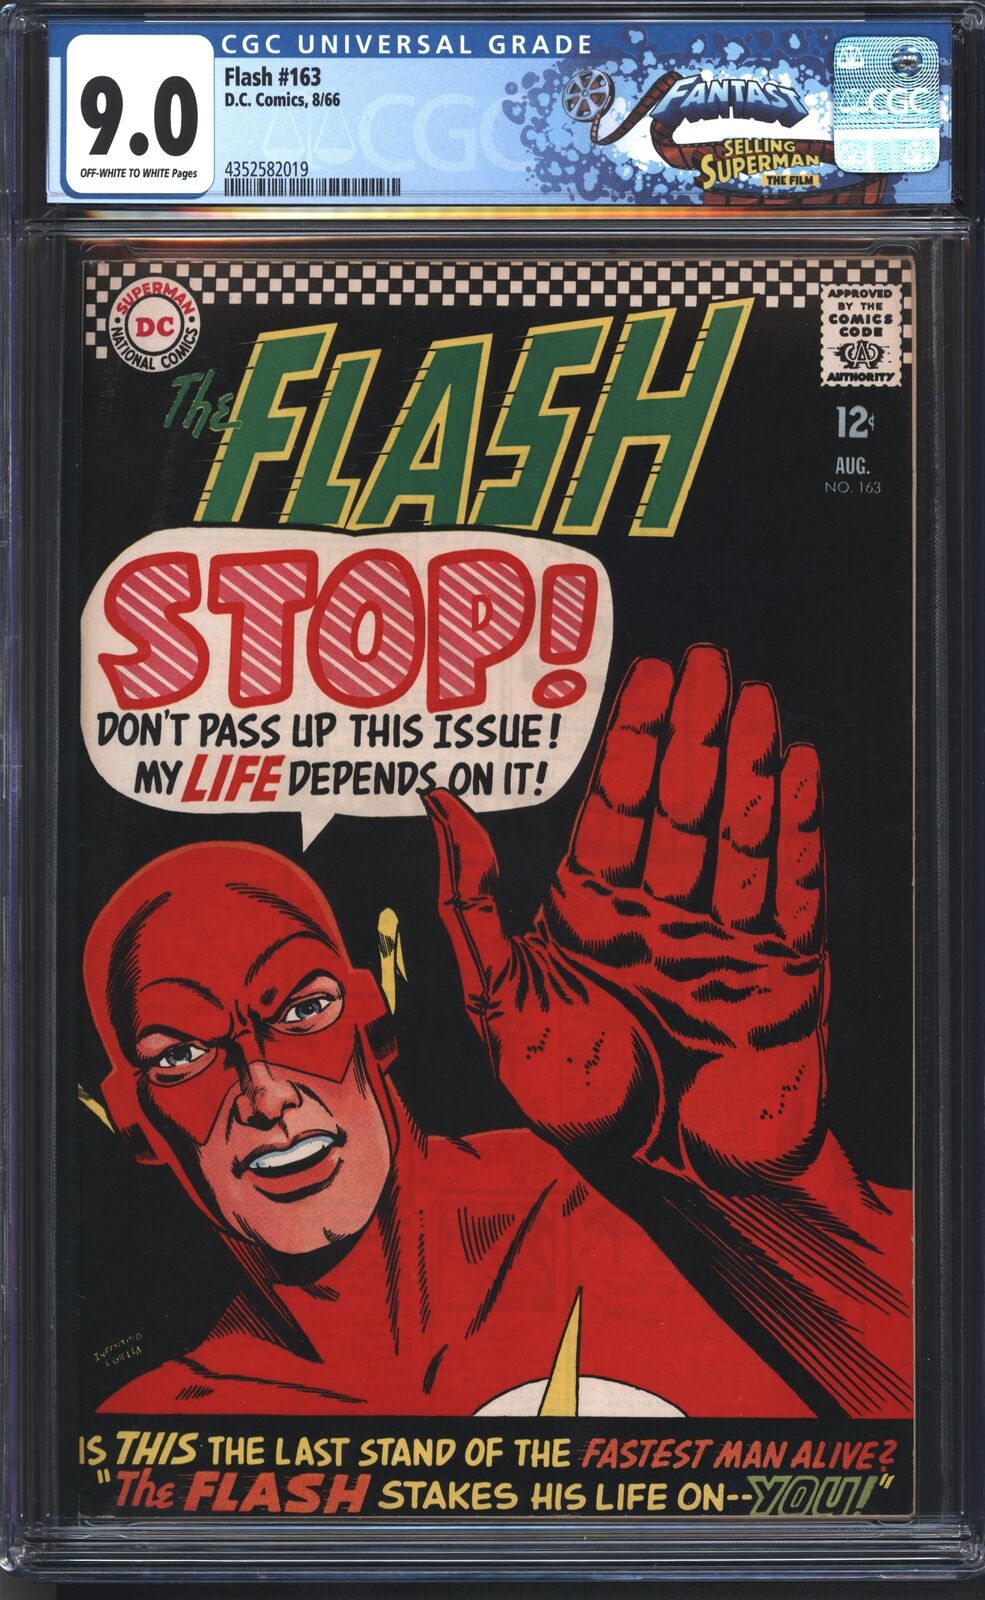 D.C Comics Flash 163 8/66 FANTAST CGC 9.0 Off White to White Pages